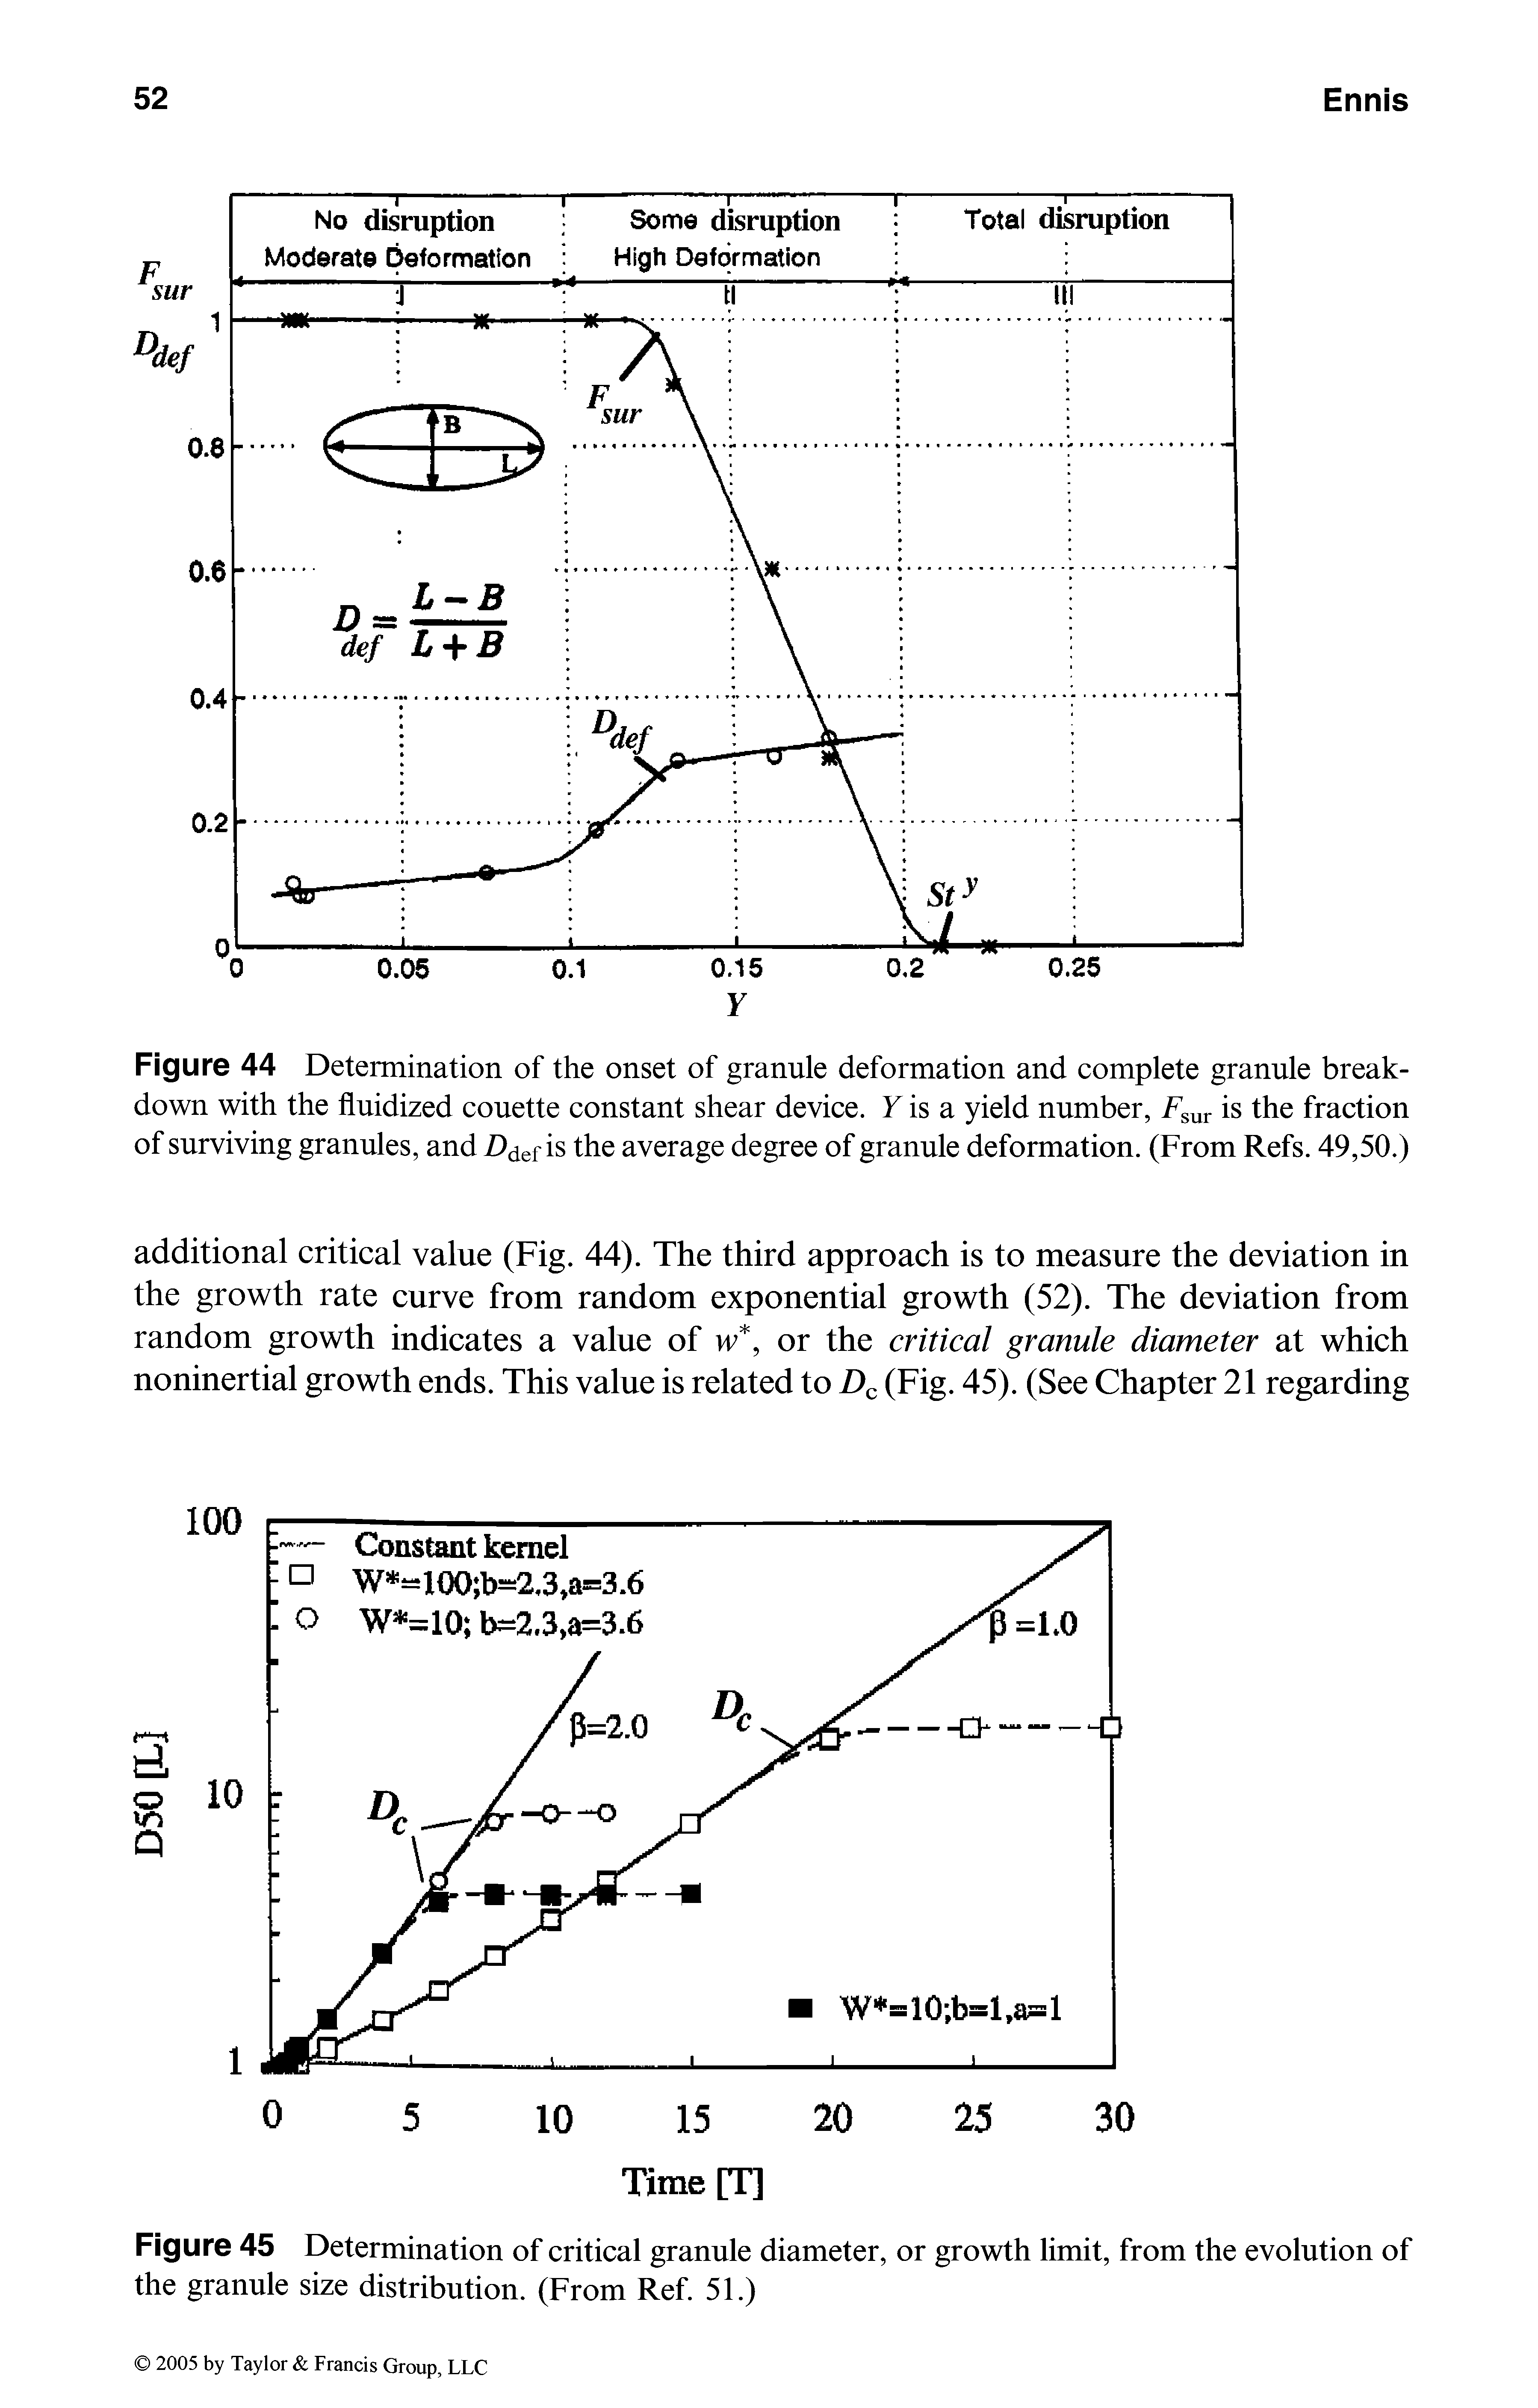 Figure 44 Detemination of the onset of granule deformation and complete granule breakdown with the fluidized couette constant shear device. F is a yield number, F ur is the fraction of surviving granules, and Z>def is the average degree of granule deformation. (From Refs. 49,50.)...